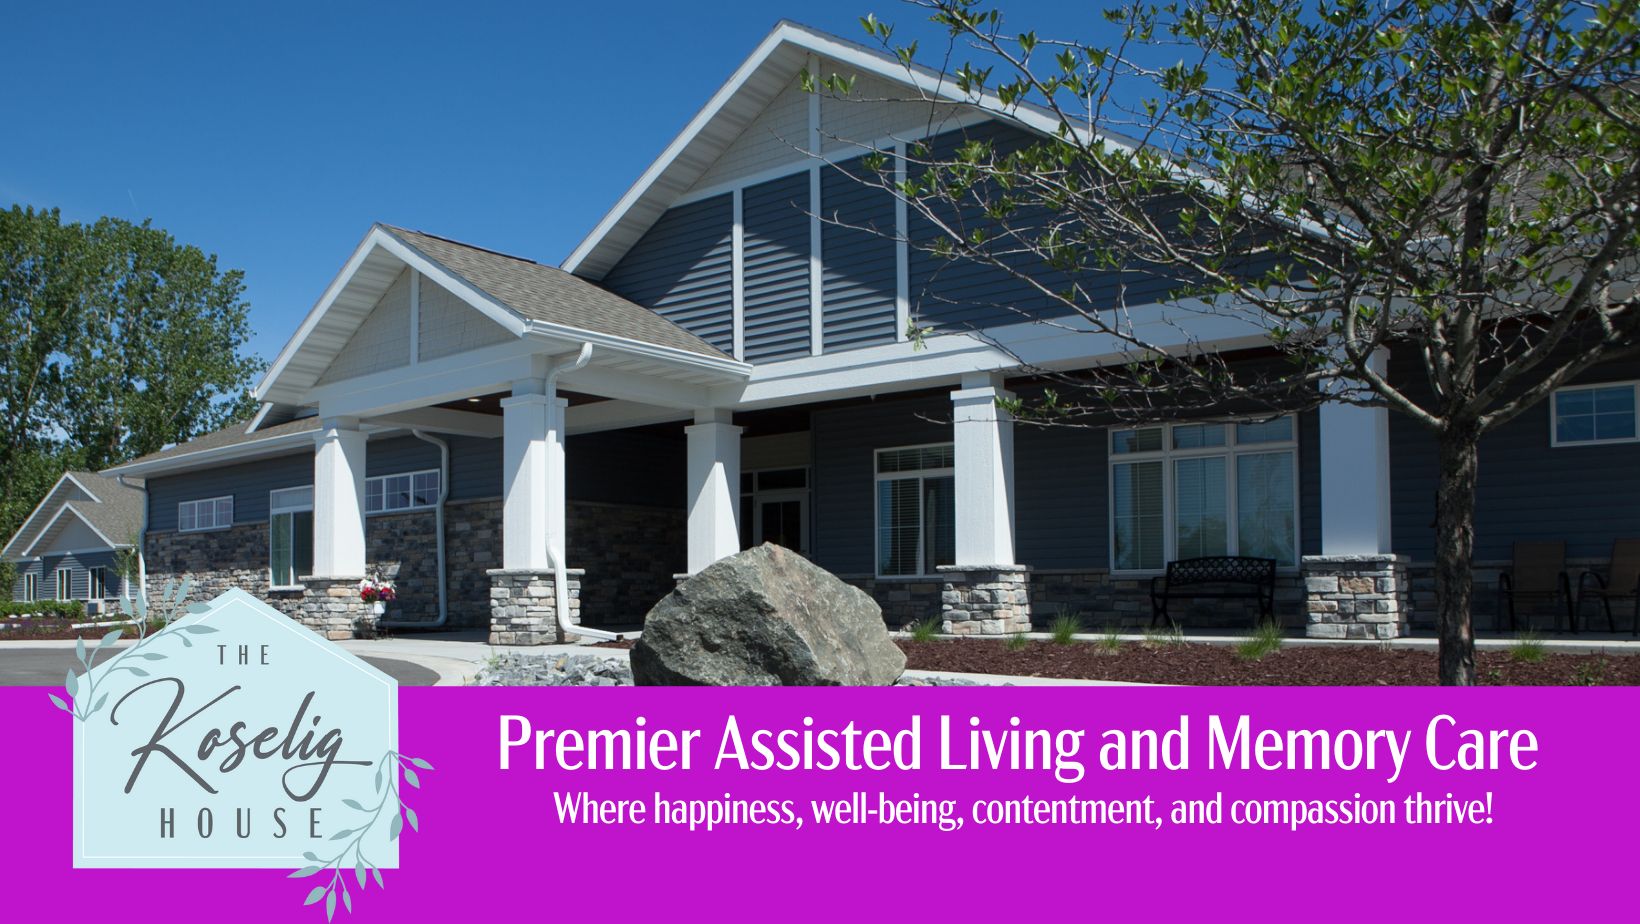 Welcome to The Koselig House, the premiere provider of Assisted Living and Memory Care home in DeForest, Wisconsin.